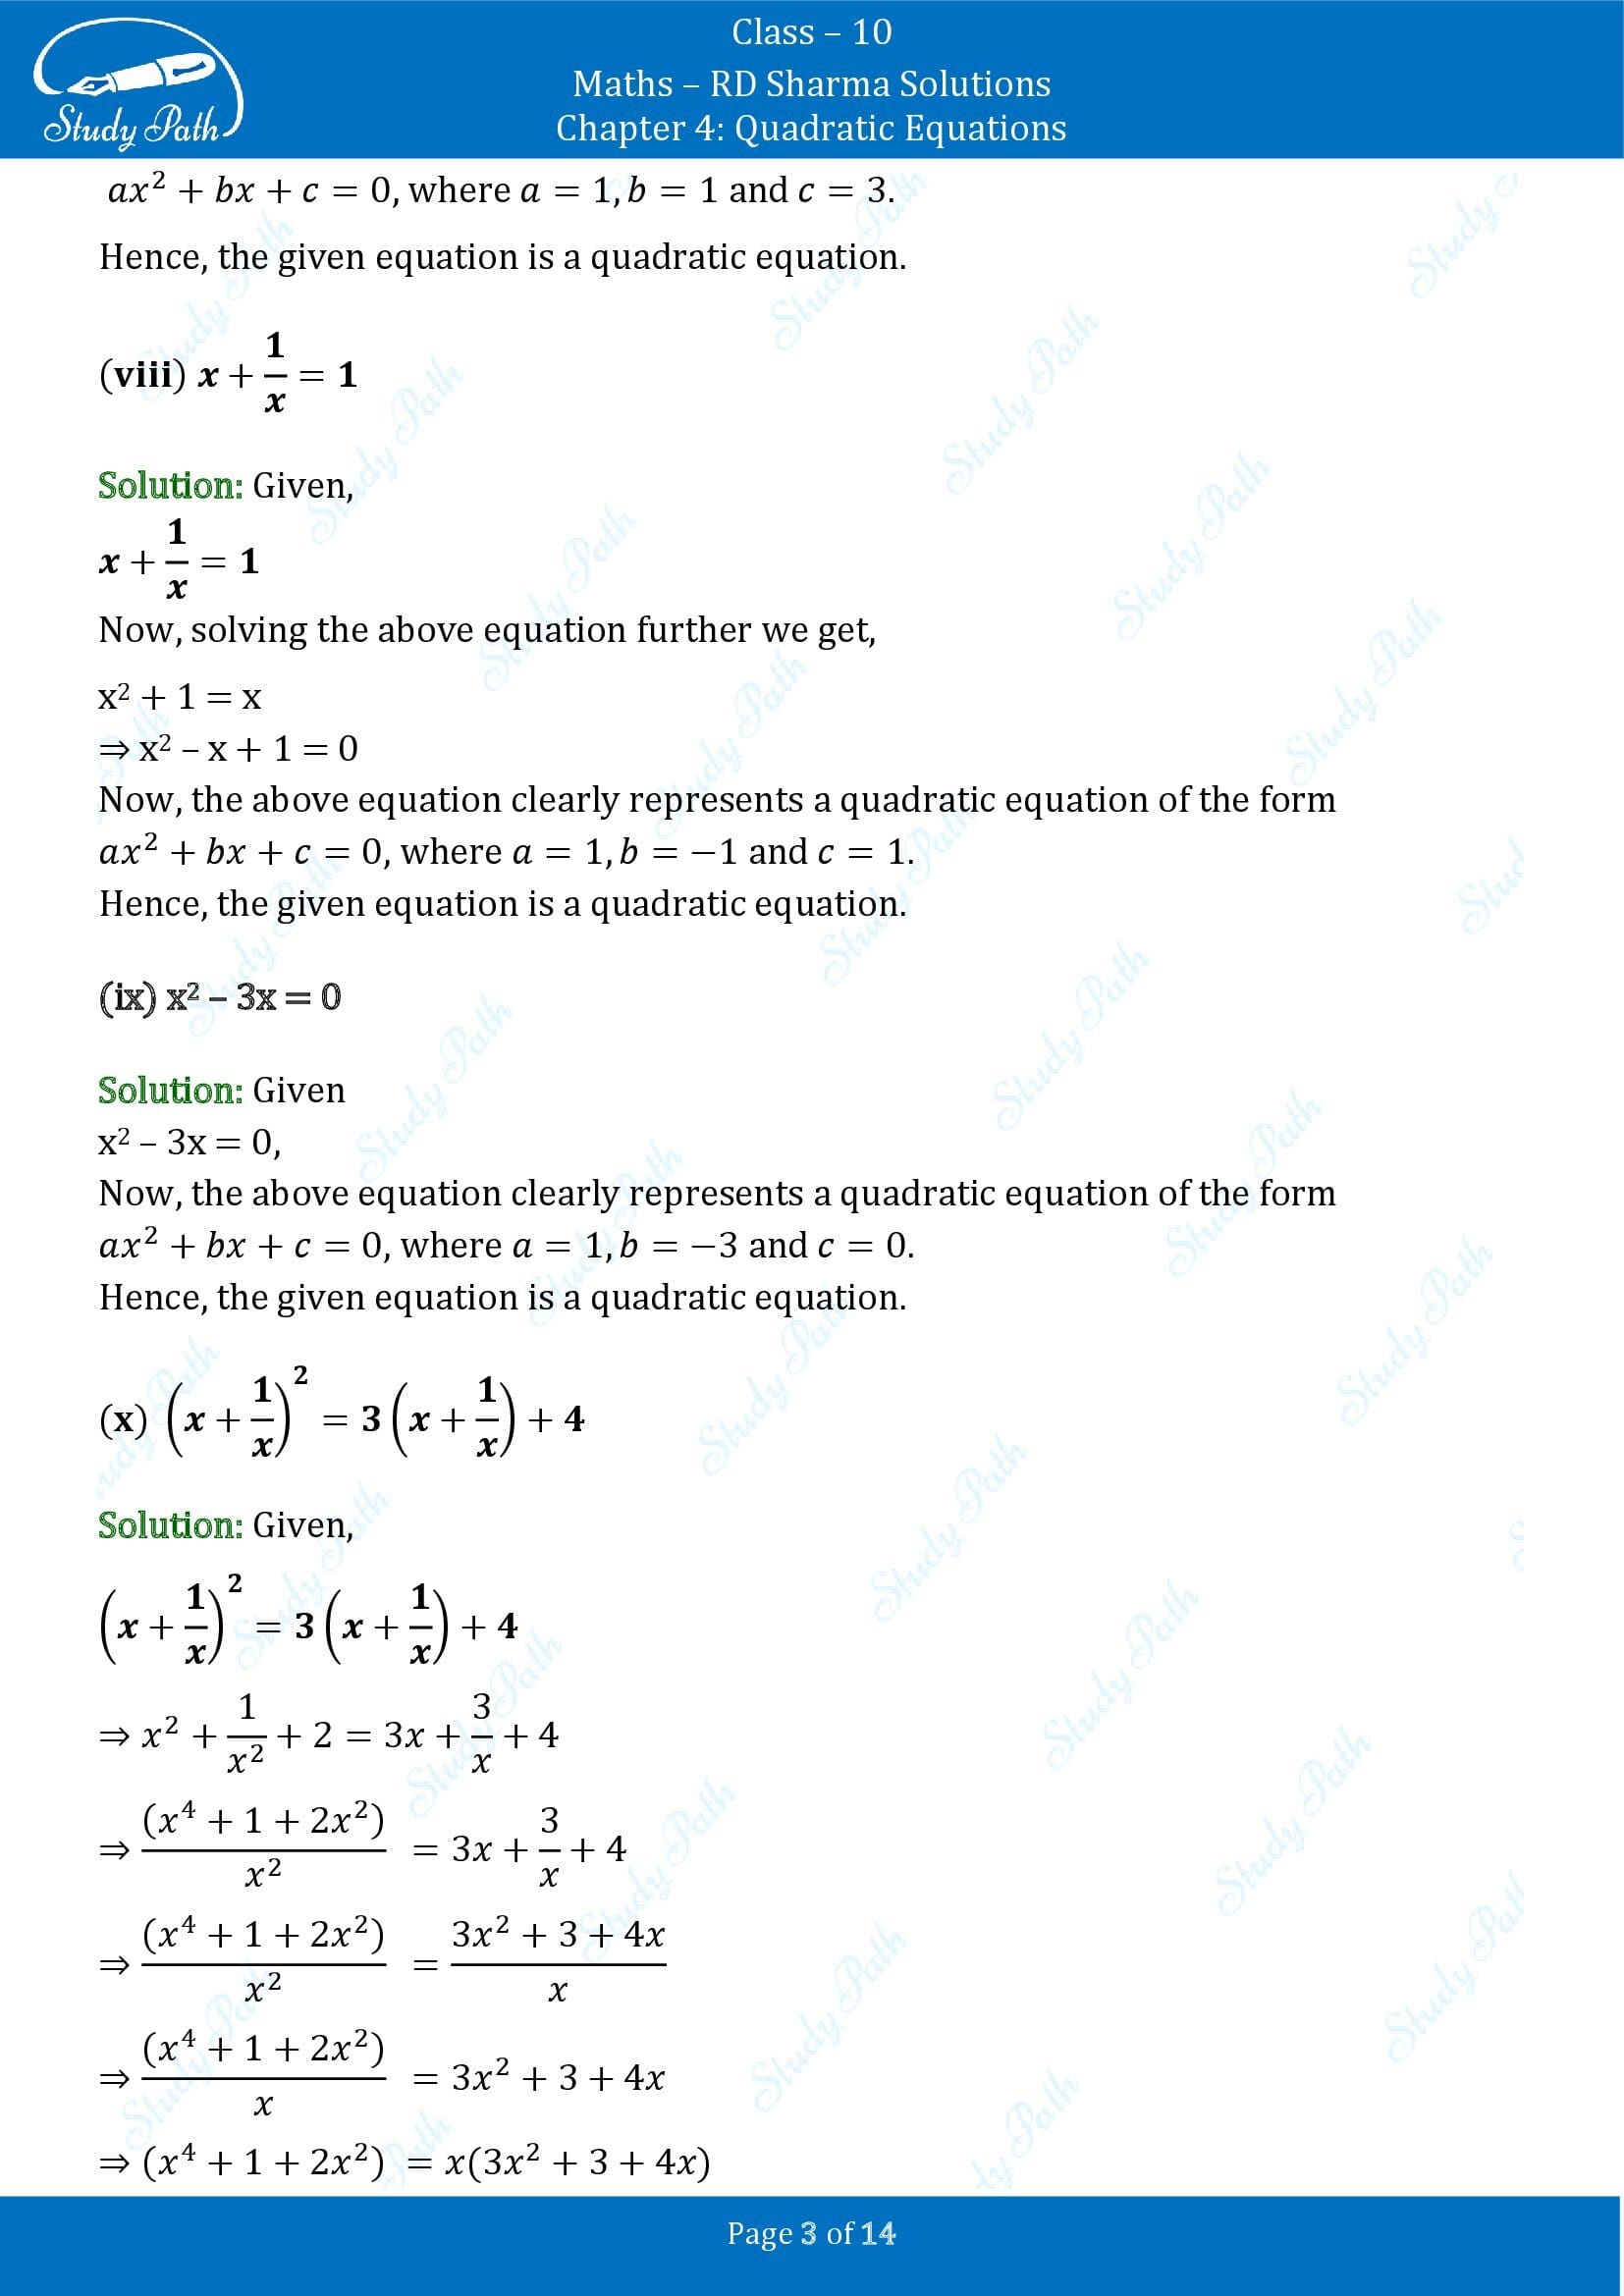 RD Sharma Solutions Class 10 Chapter 4 Quadratic Equations Exercise 4.1 00003